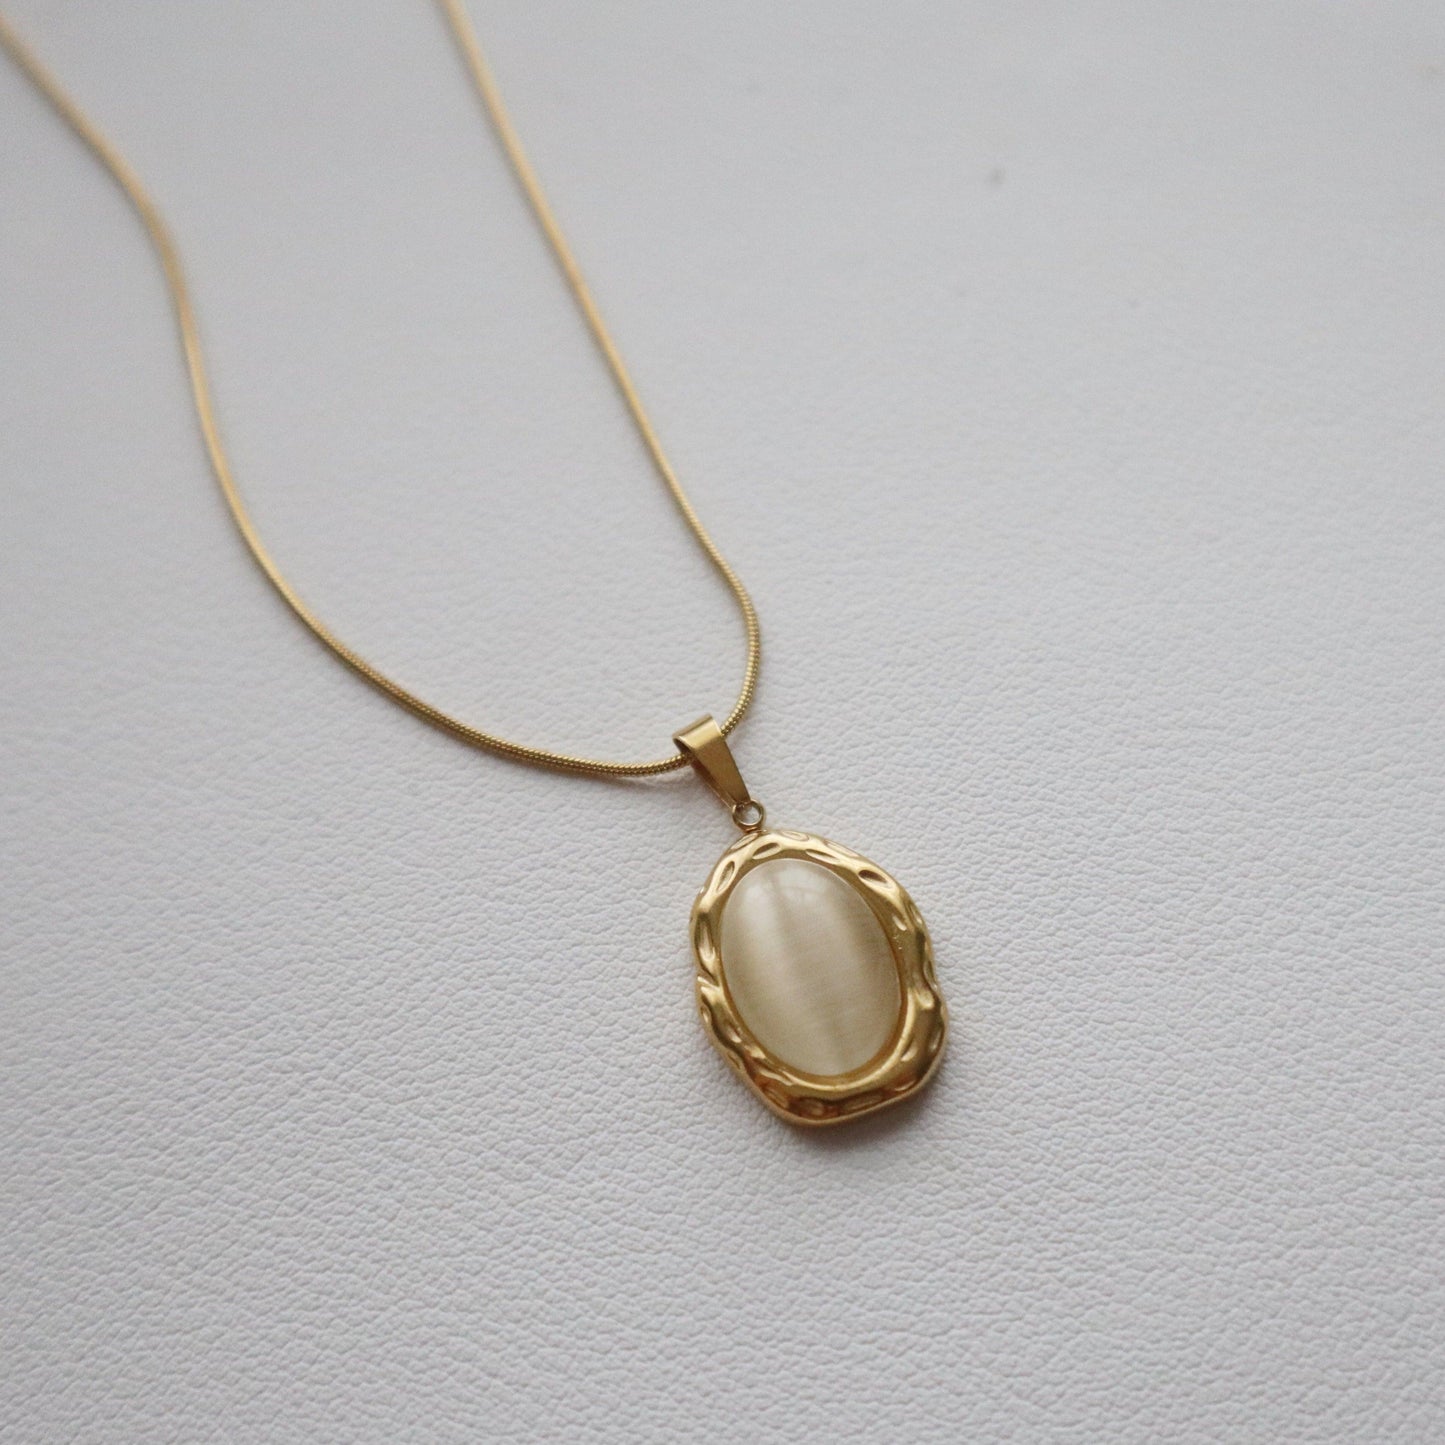 Cat Eye Opal Necklace | Pendant Necklace - JESSA JEWELRY | GOLD JEWELRY; dainty, affordable gold everyday jewelry. Tarnish free, water-resistant, hypoallergenic. Jewelry for everyday wear